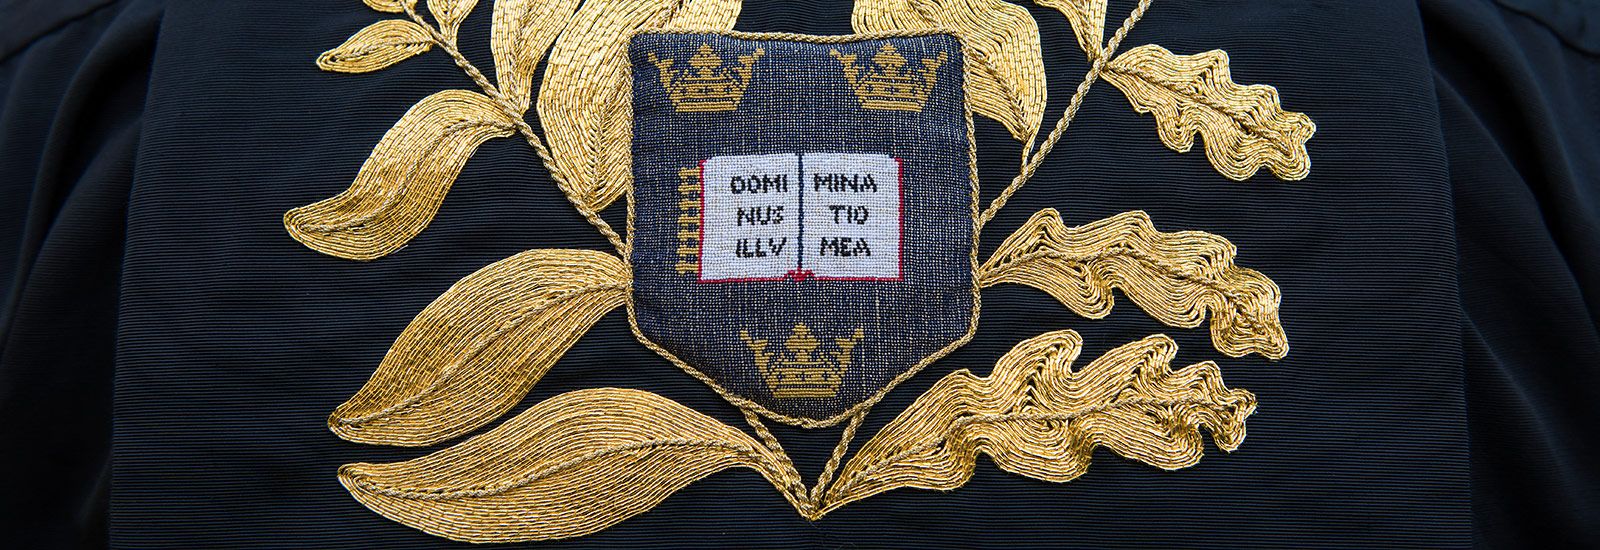 Detail from the Chancellor's robe